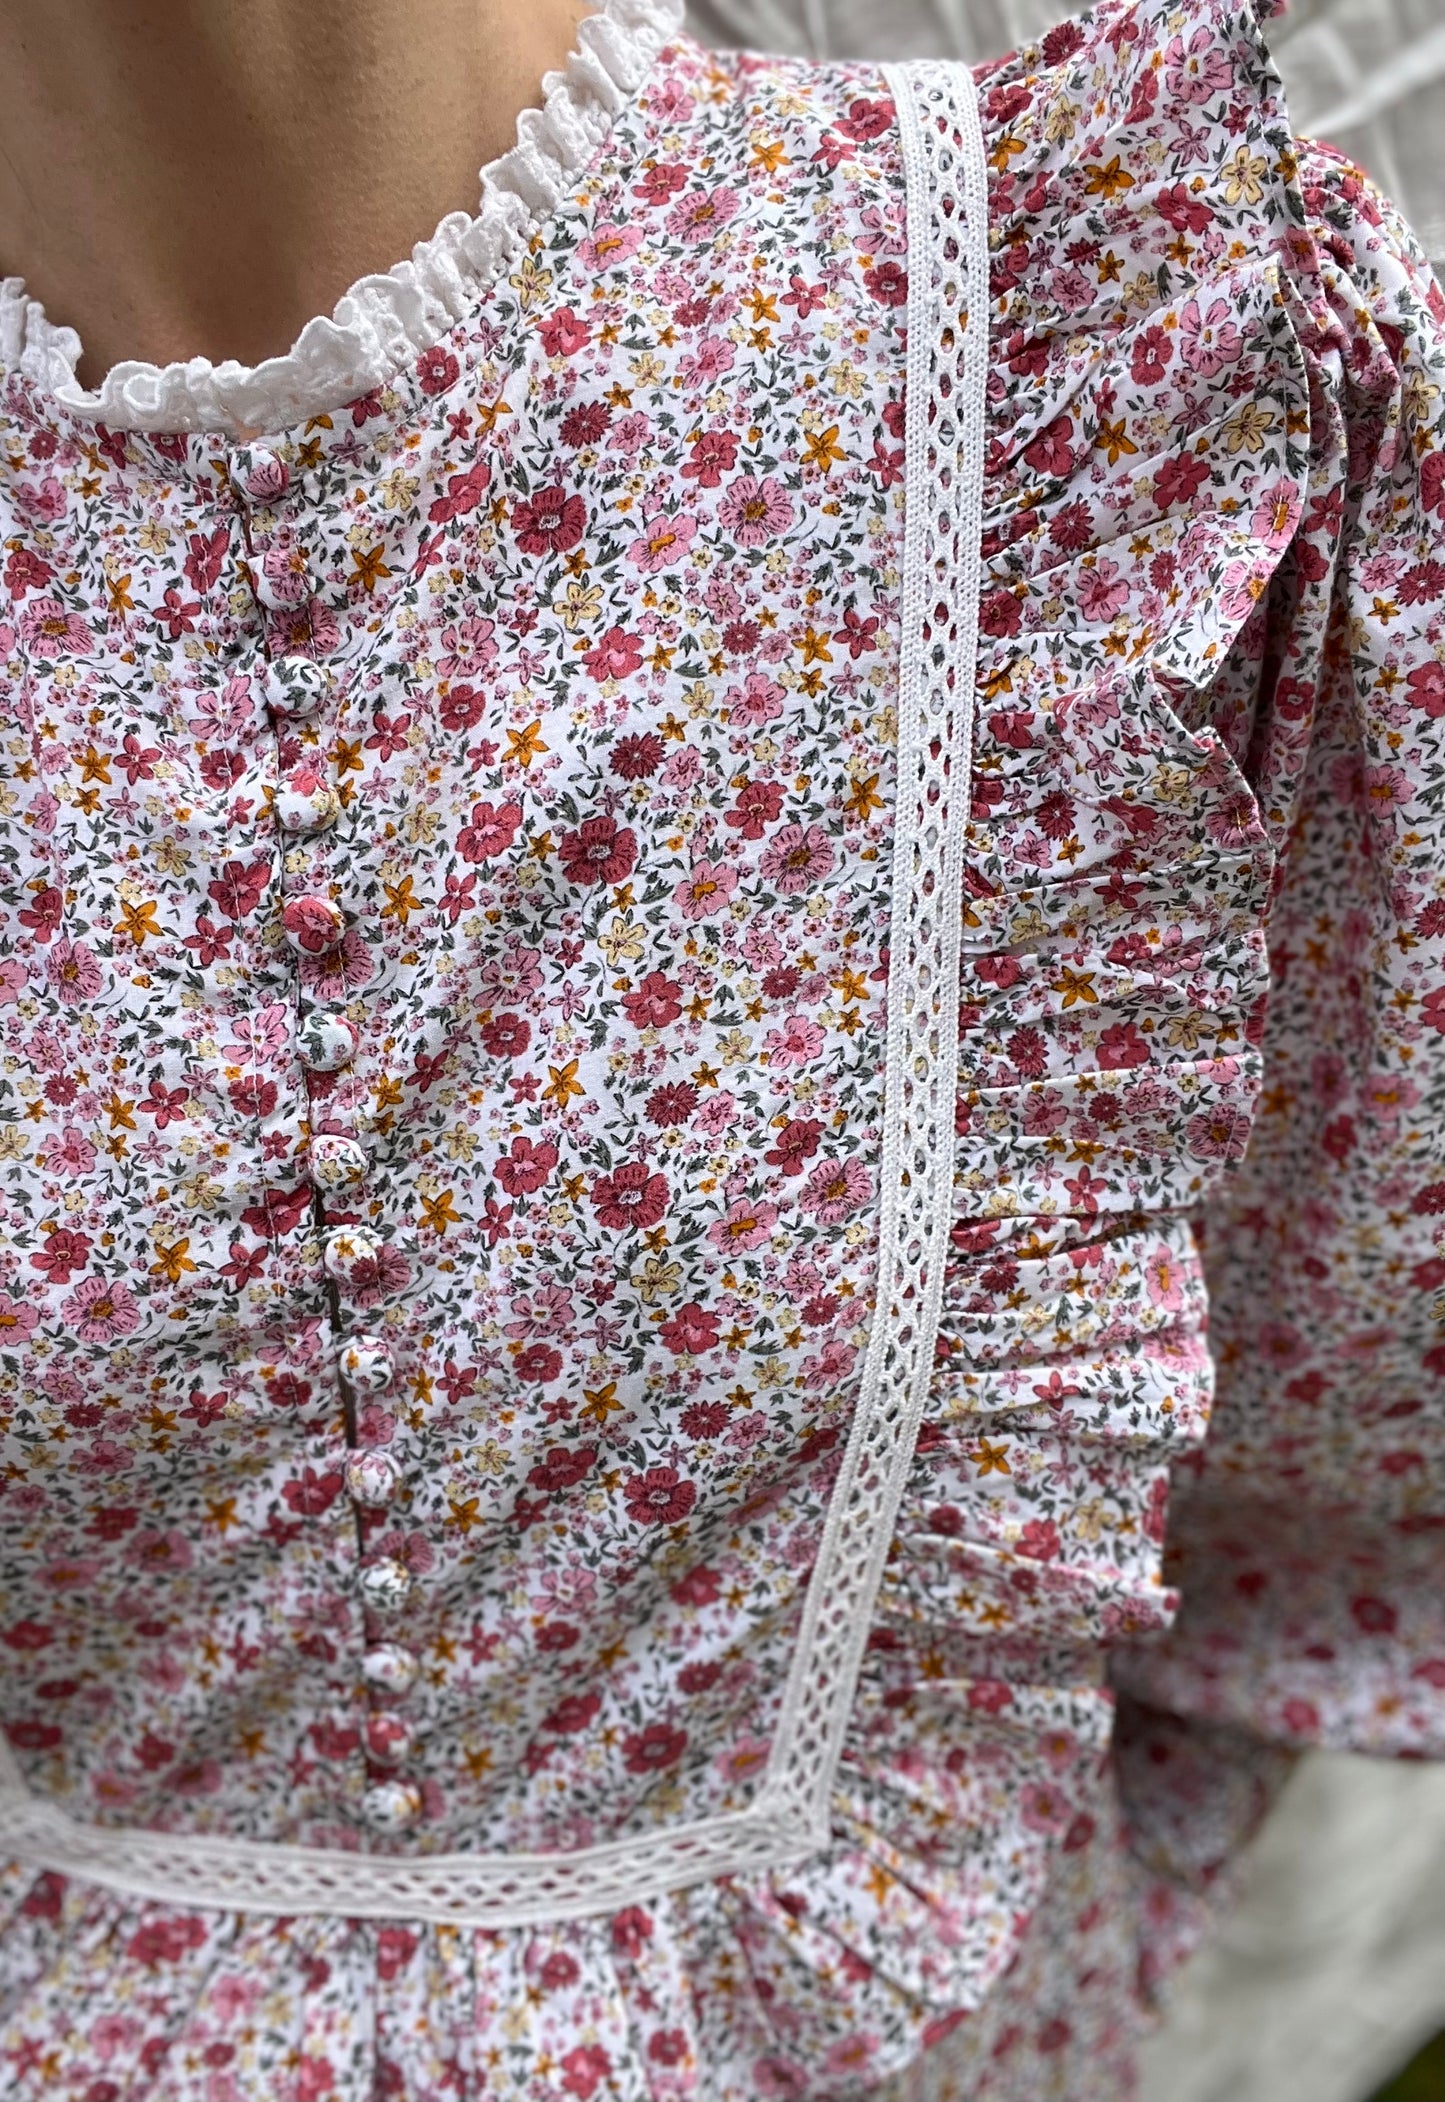 100% RECYCLED COTTON - CLARA DRESS PINK DITSY FLORAL